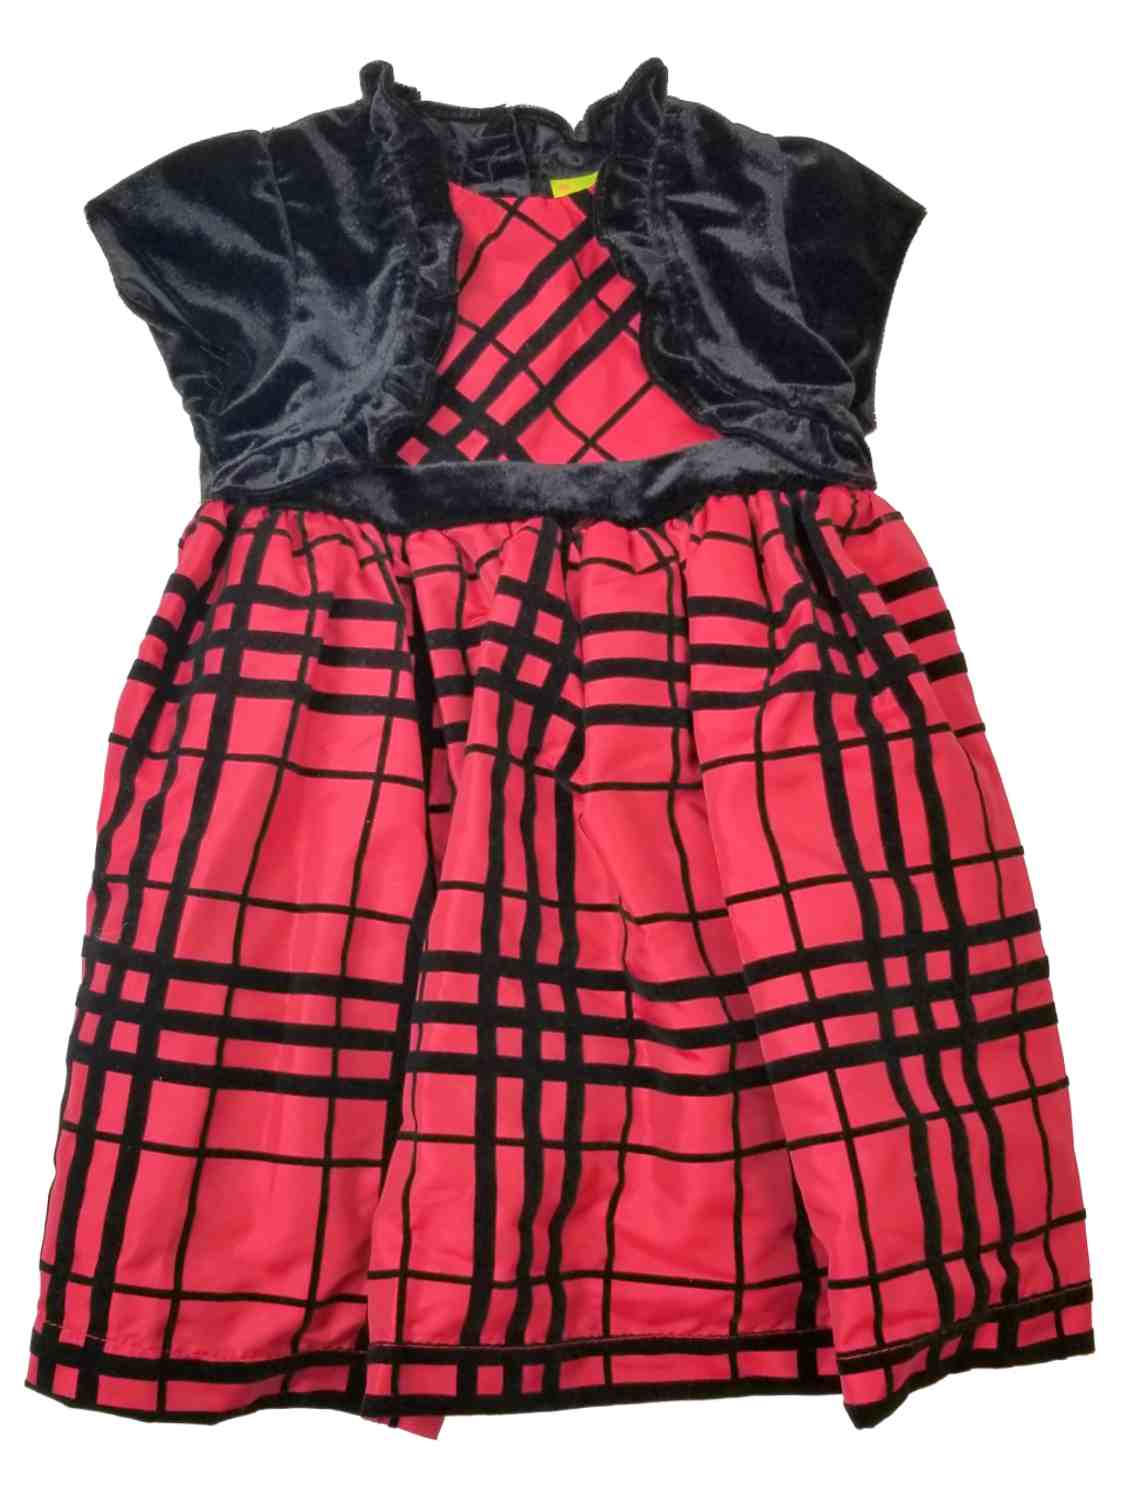 Penelope Mack Infant Baby Girls Red Black Plaid Christmas Holiday Party Dress 12M